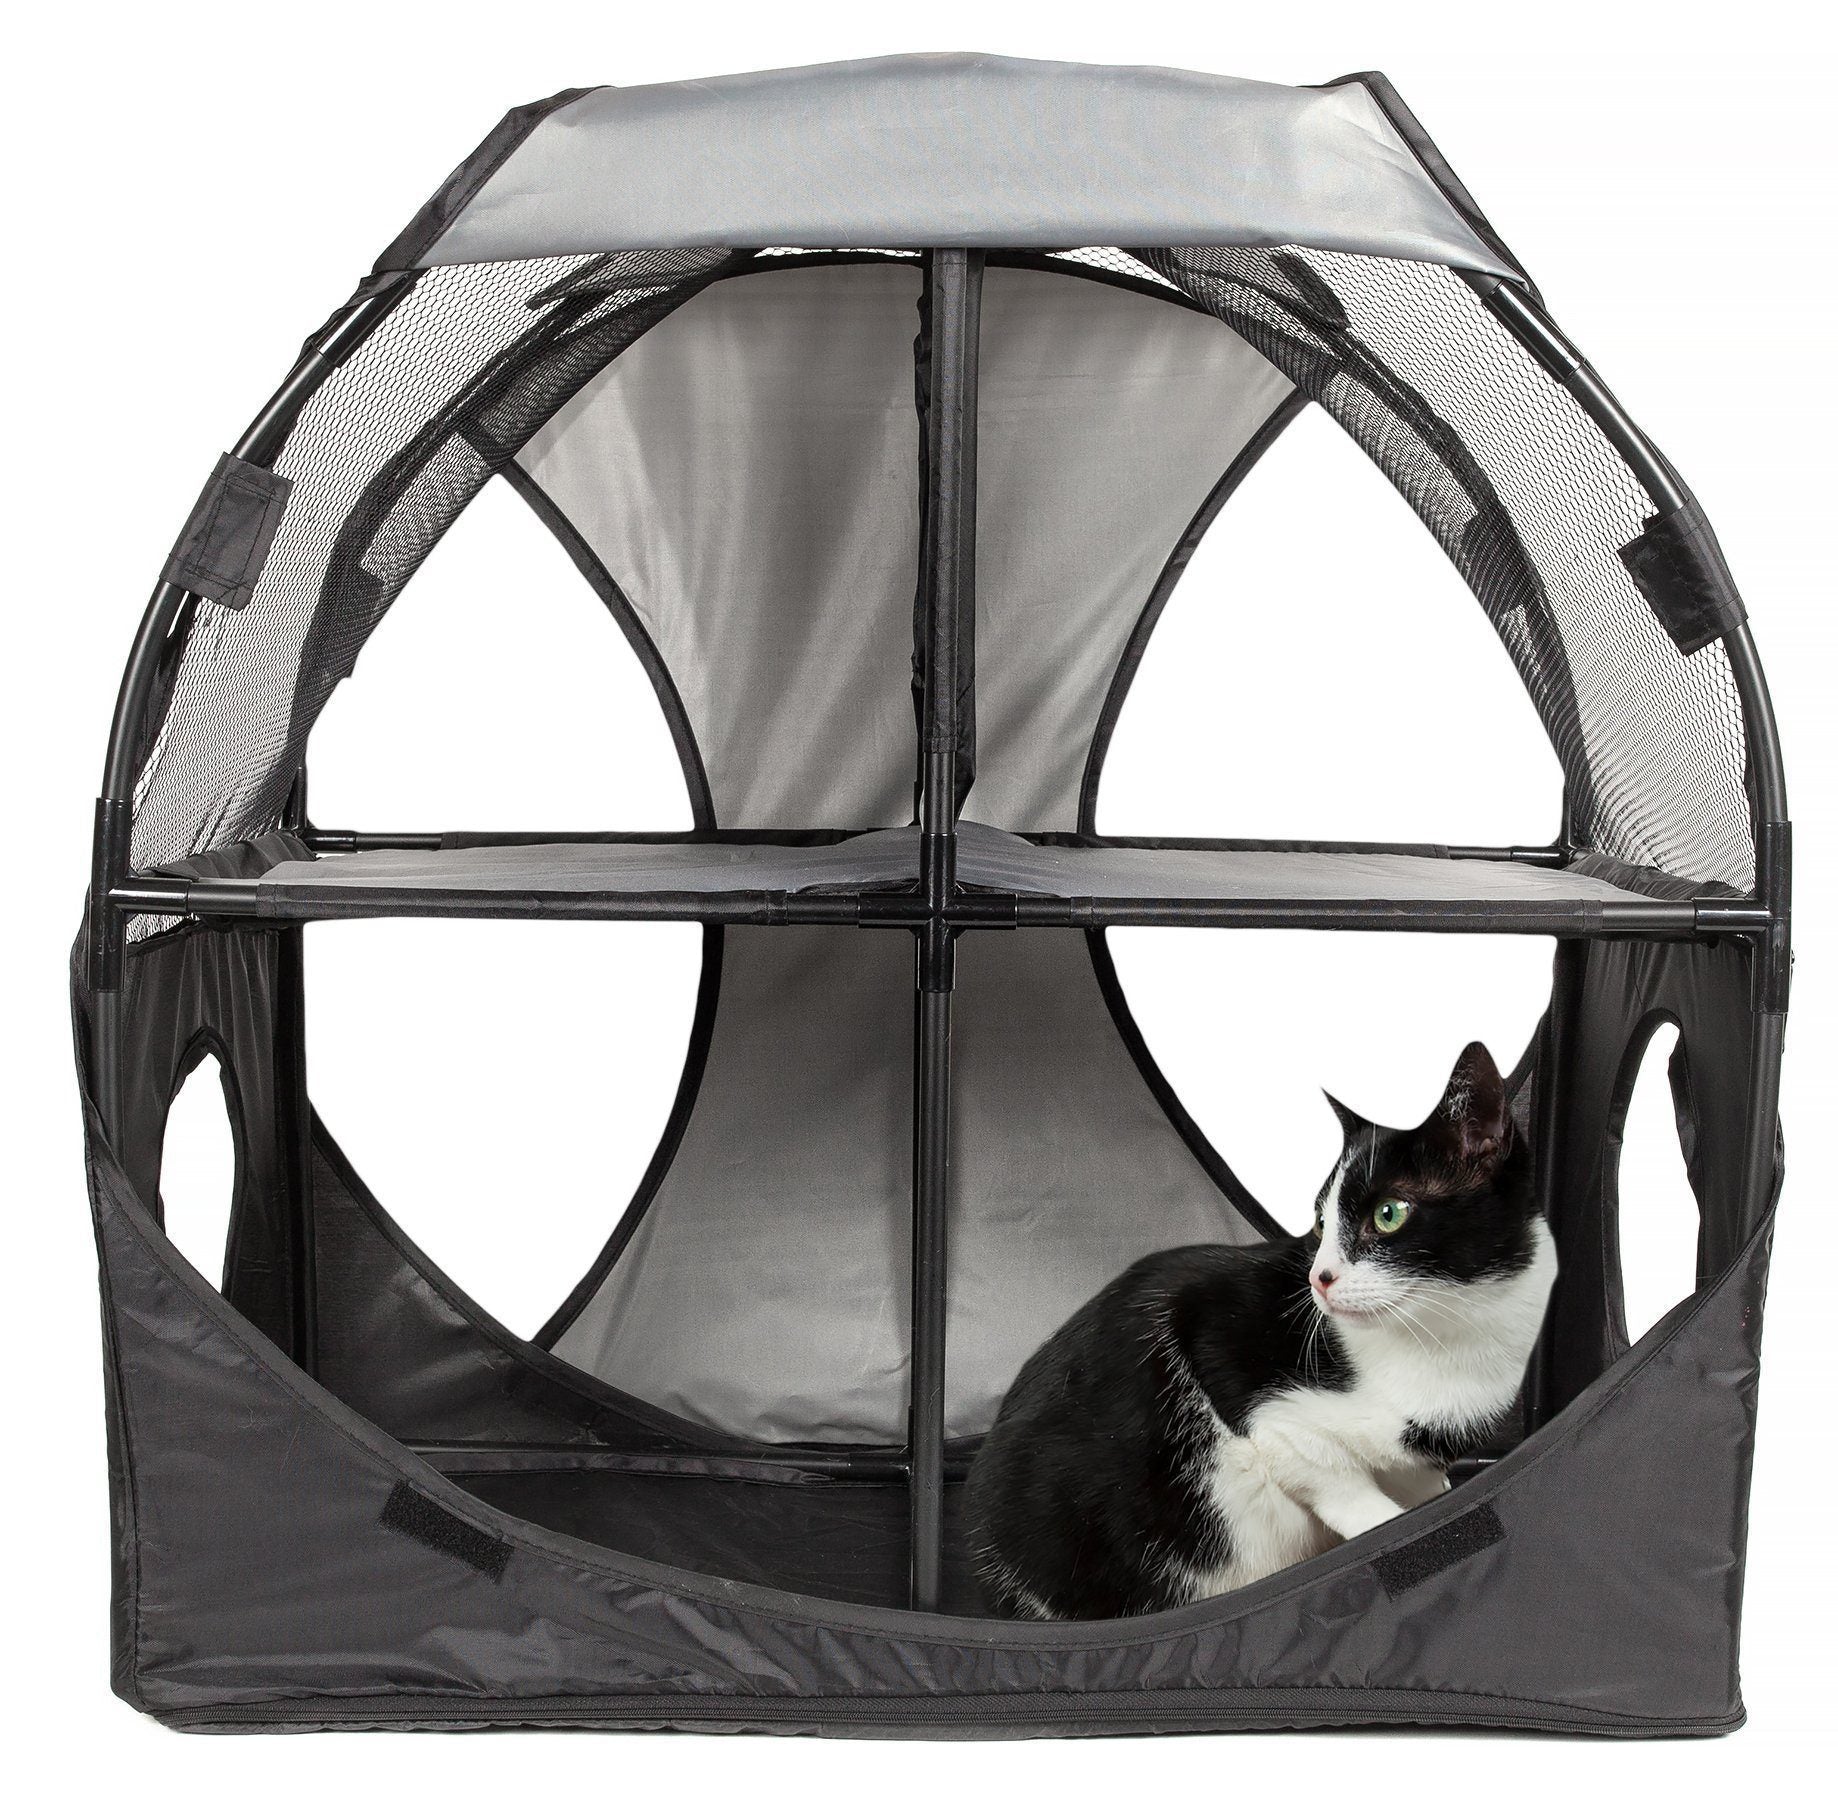 Pet Life ® 'Kitty-Play' Collapsible Travel Interactive Kitty Cat Tree Maze House Lounger Tunnel Lounge Grey, Black 